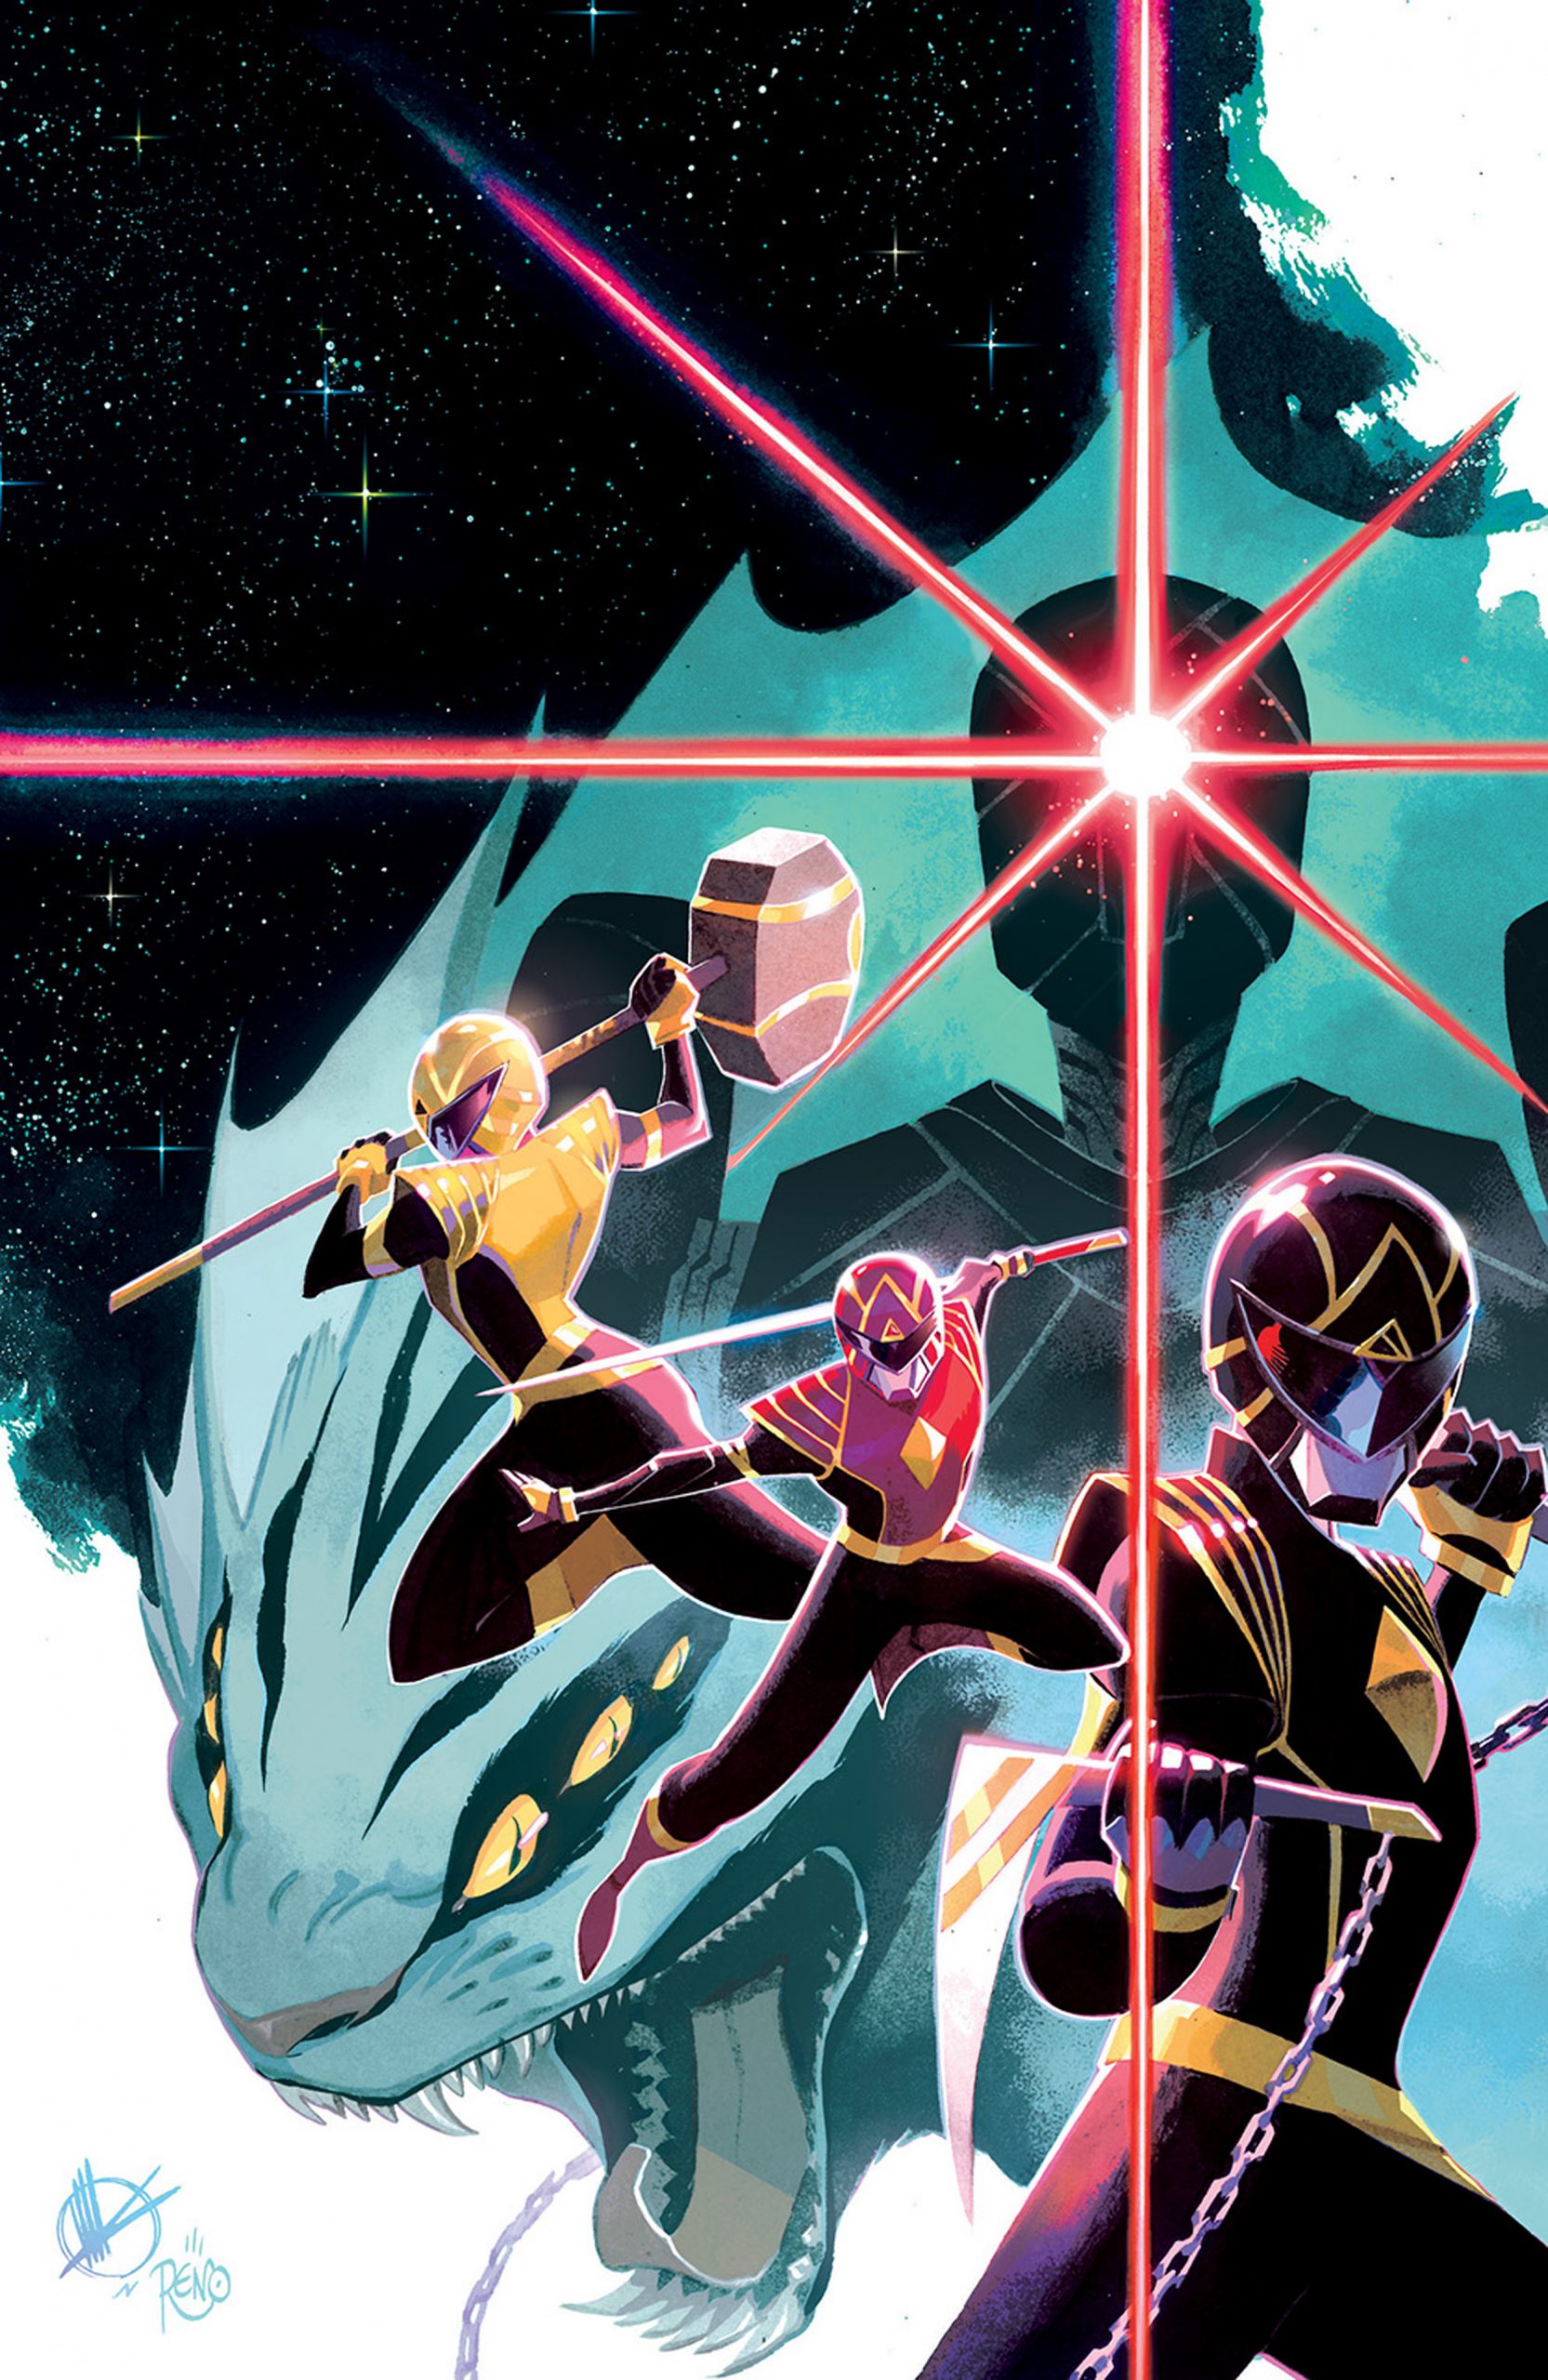 COMIC REVIEW - Power Rangers Issue 1.